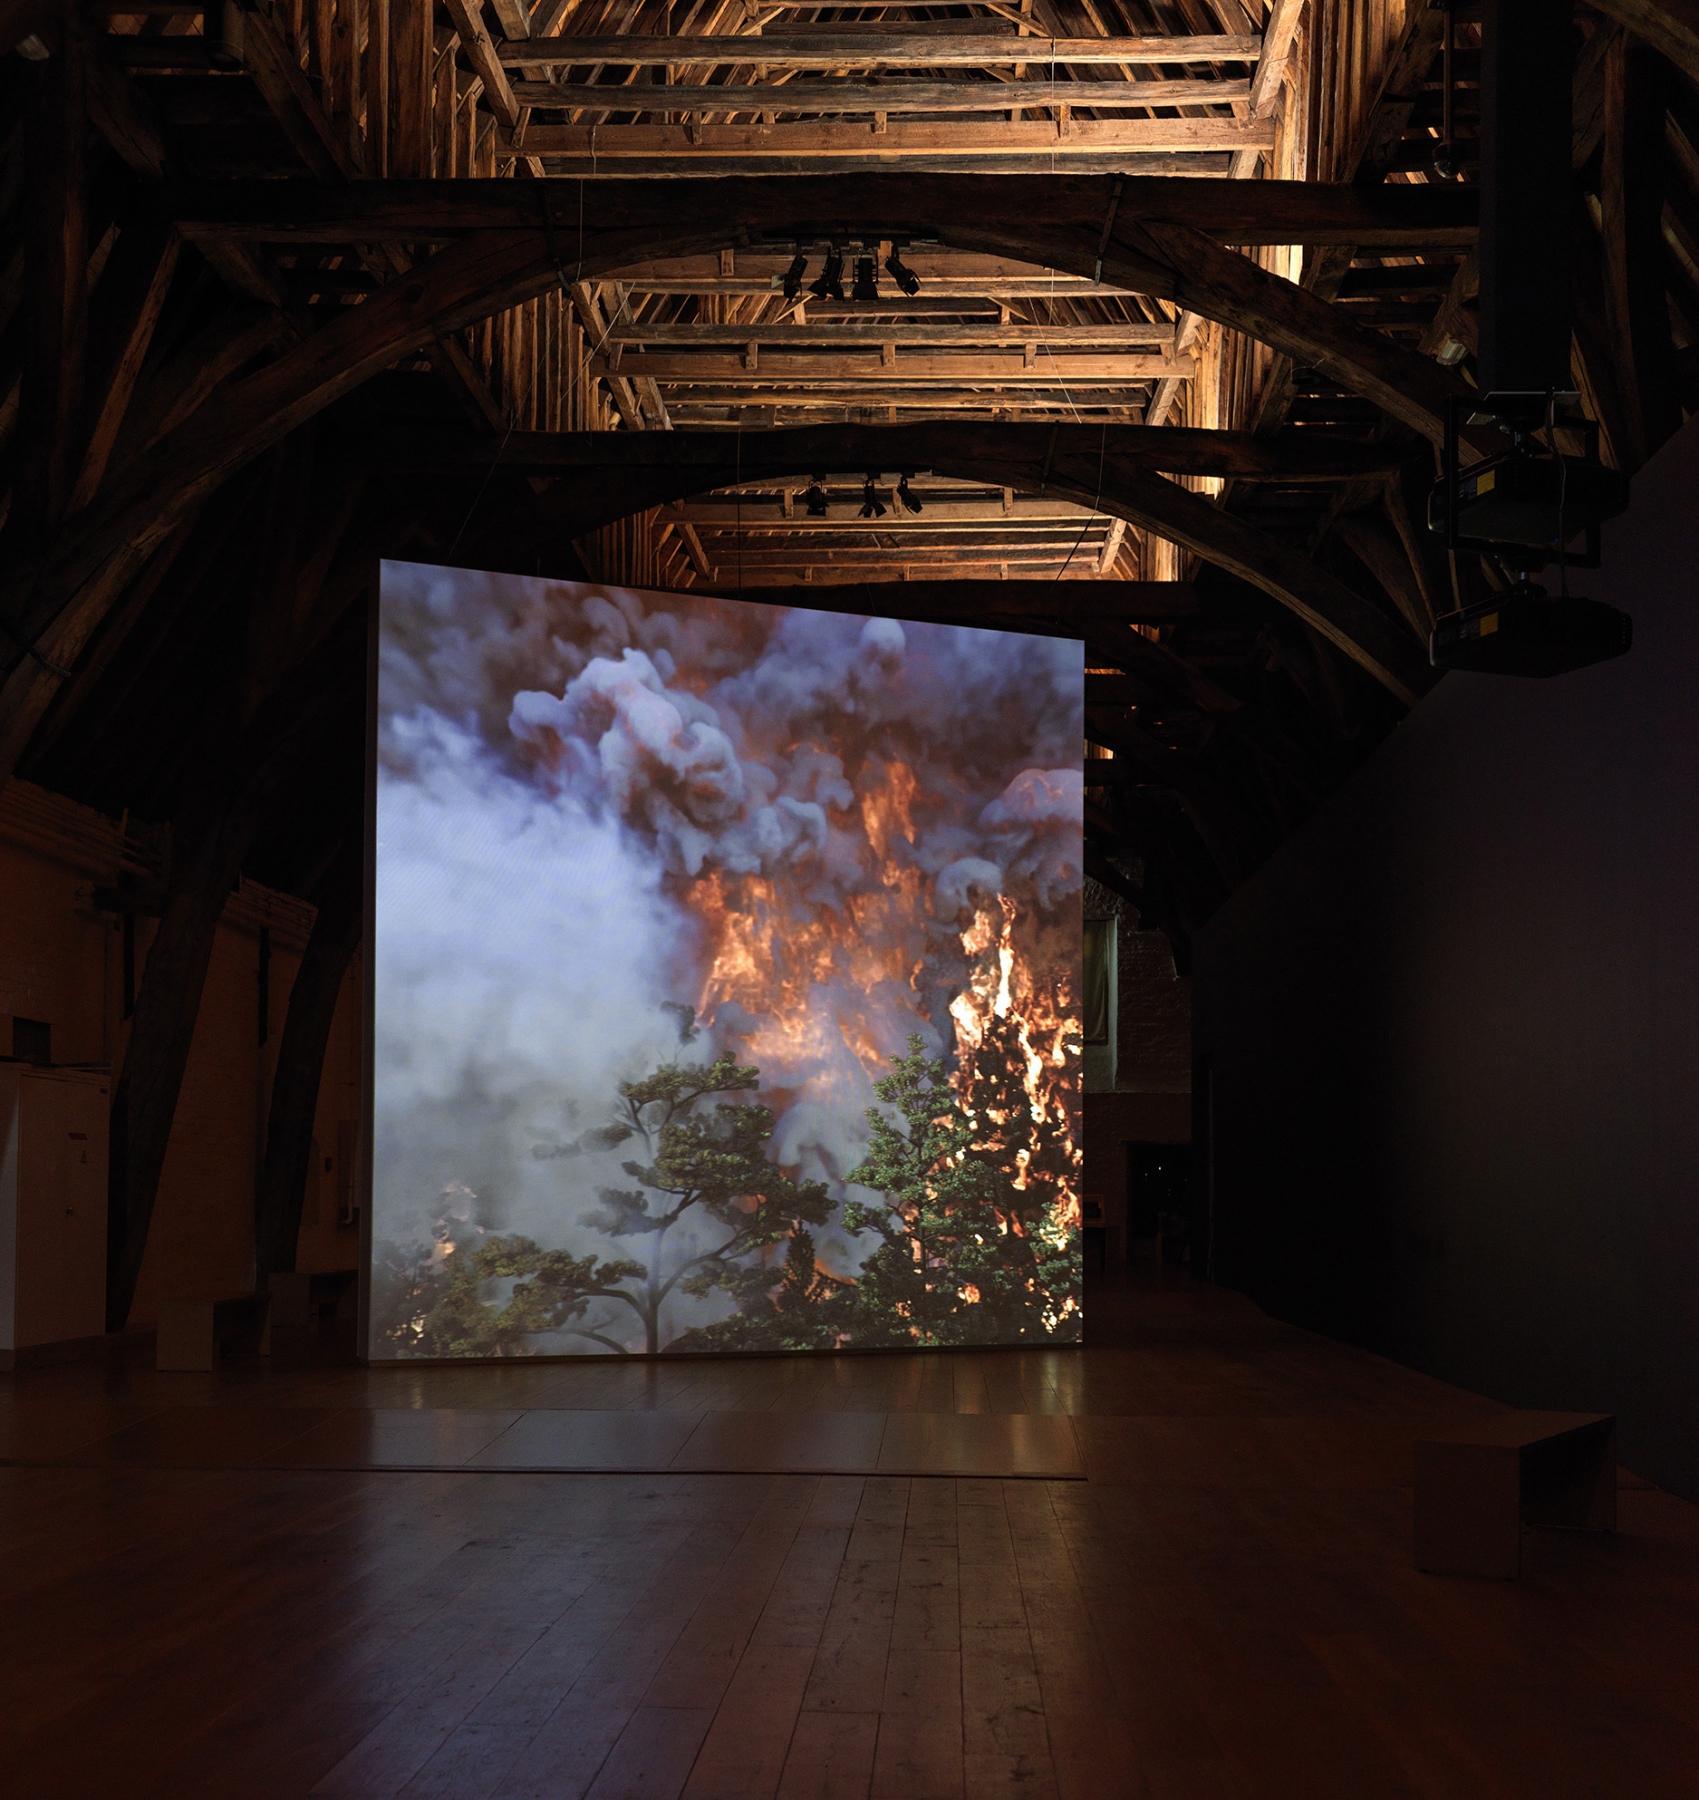 David Claerbout, Wildfire (Meditation on Fire), 2019-2020, single channel video projection, 3D animation, stereo audio, color, 24 min, Installation: Musea Brugge, St John&#39;s Hospital, Bruges, 2020 (photo Dominique Provost)